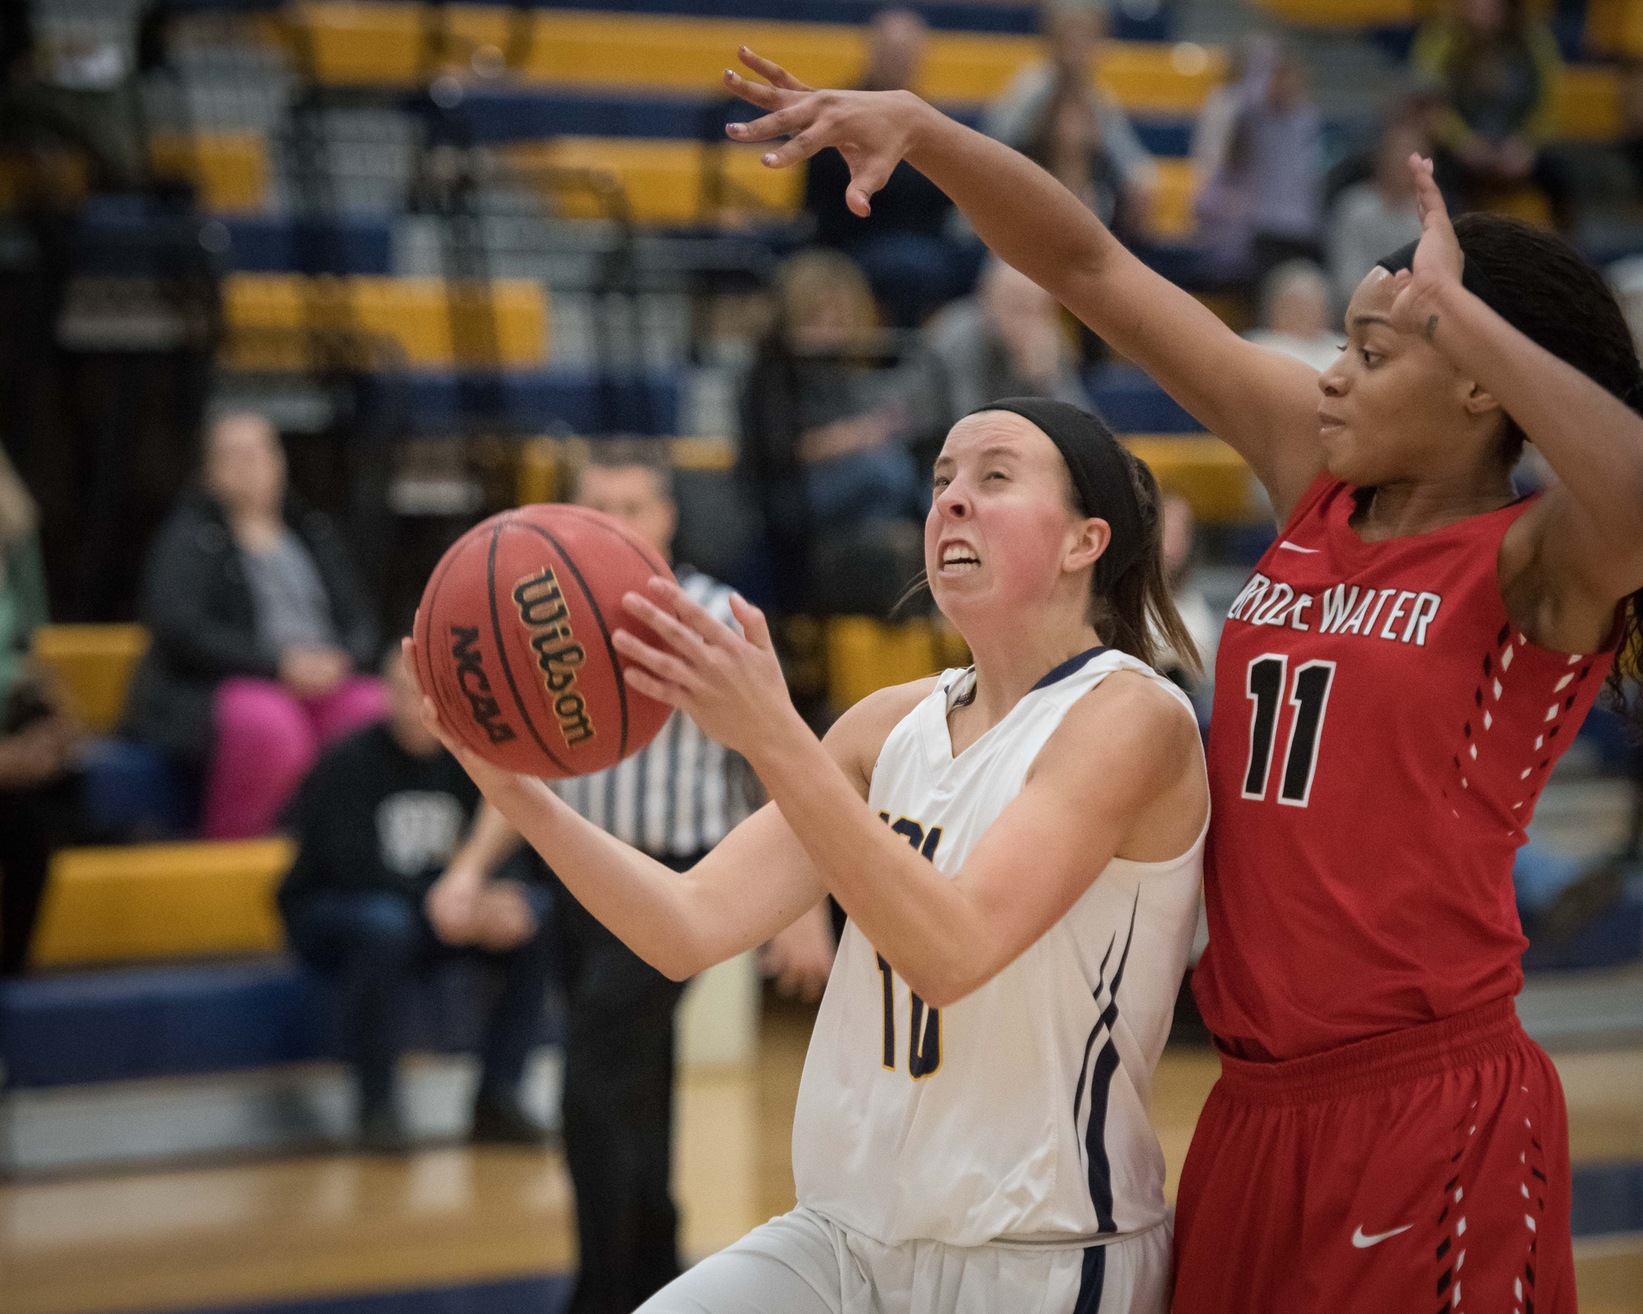 Women's Basketball tripped up at home by hot shooting Falcons 81-76